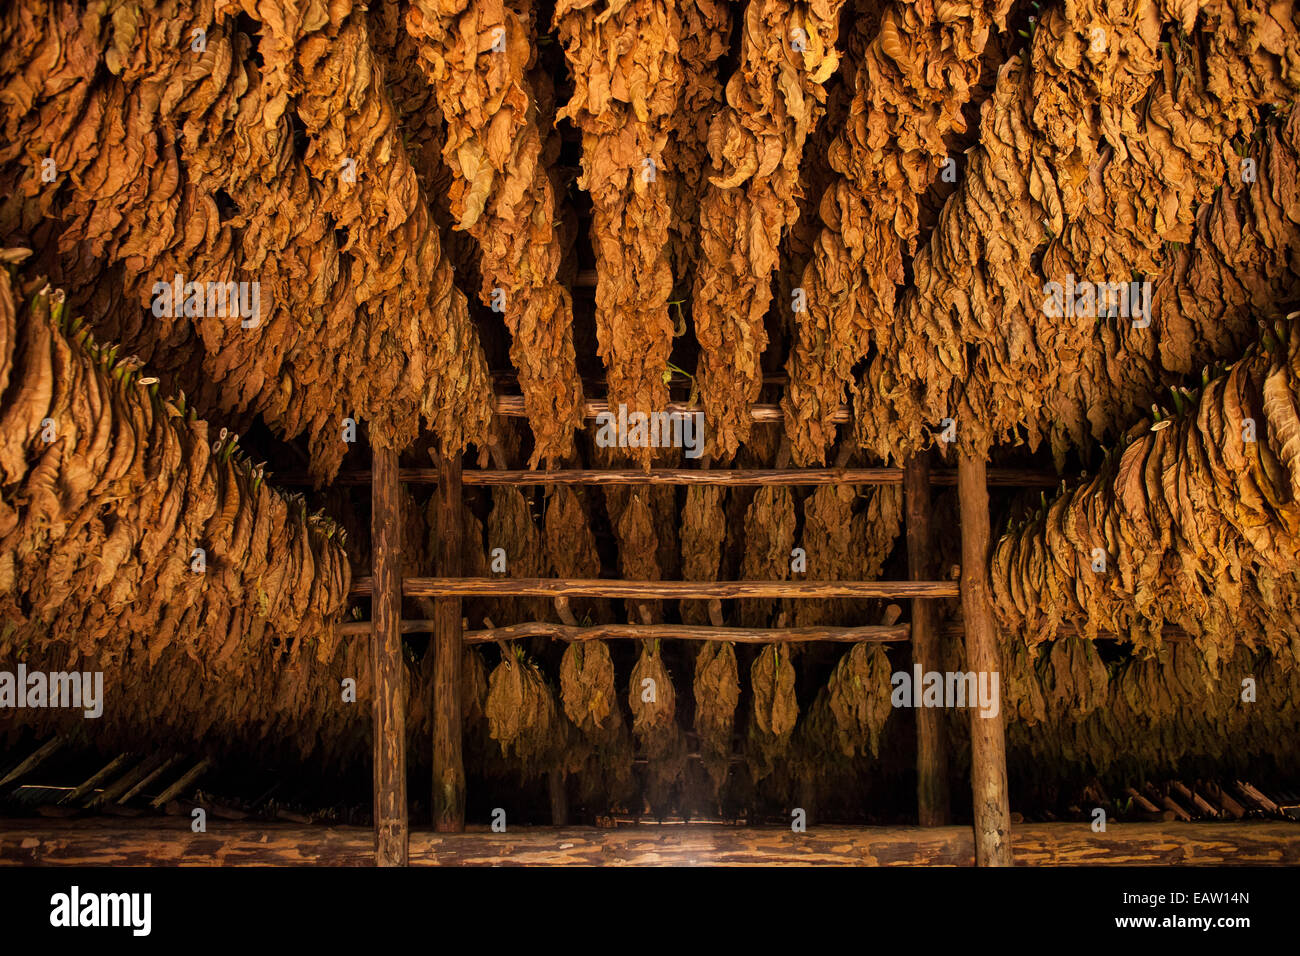 Drying tobacco leaves in a shed in Vinales Cuba Stock Photo